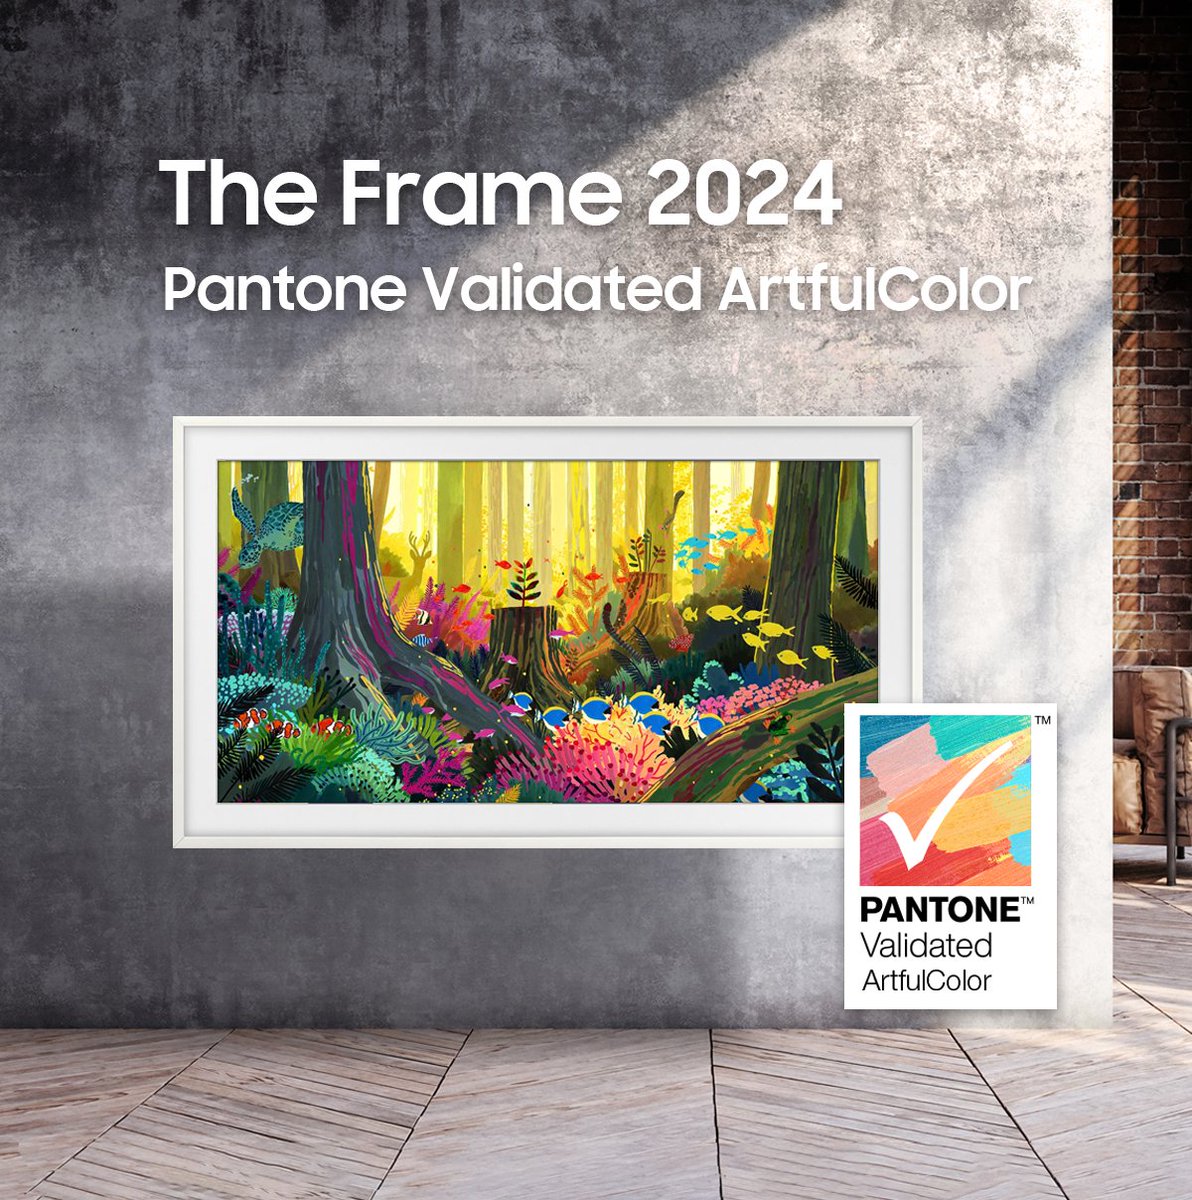 Continue to set the tone in 2024 with #TheFrameTV, which has earned it’s 1st Pantone®️ Validated ArtfulColor certification! Live in confident colour knowing that your TV's been validated by a globally renowned authority in colour standards More here: bit.ly/3UEHSyb